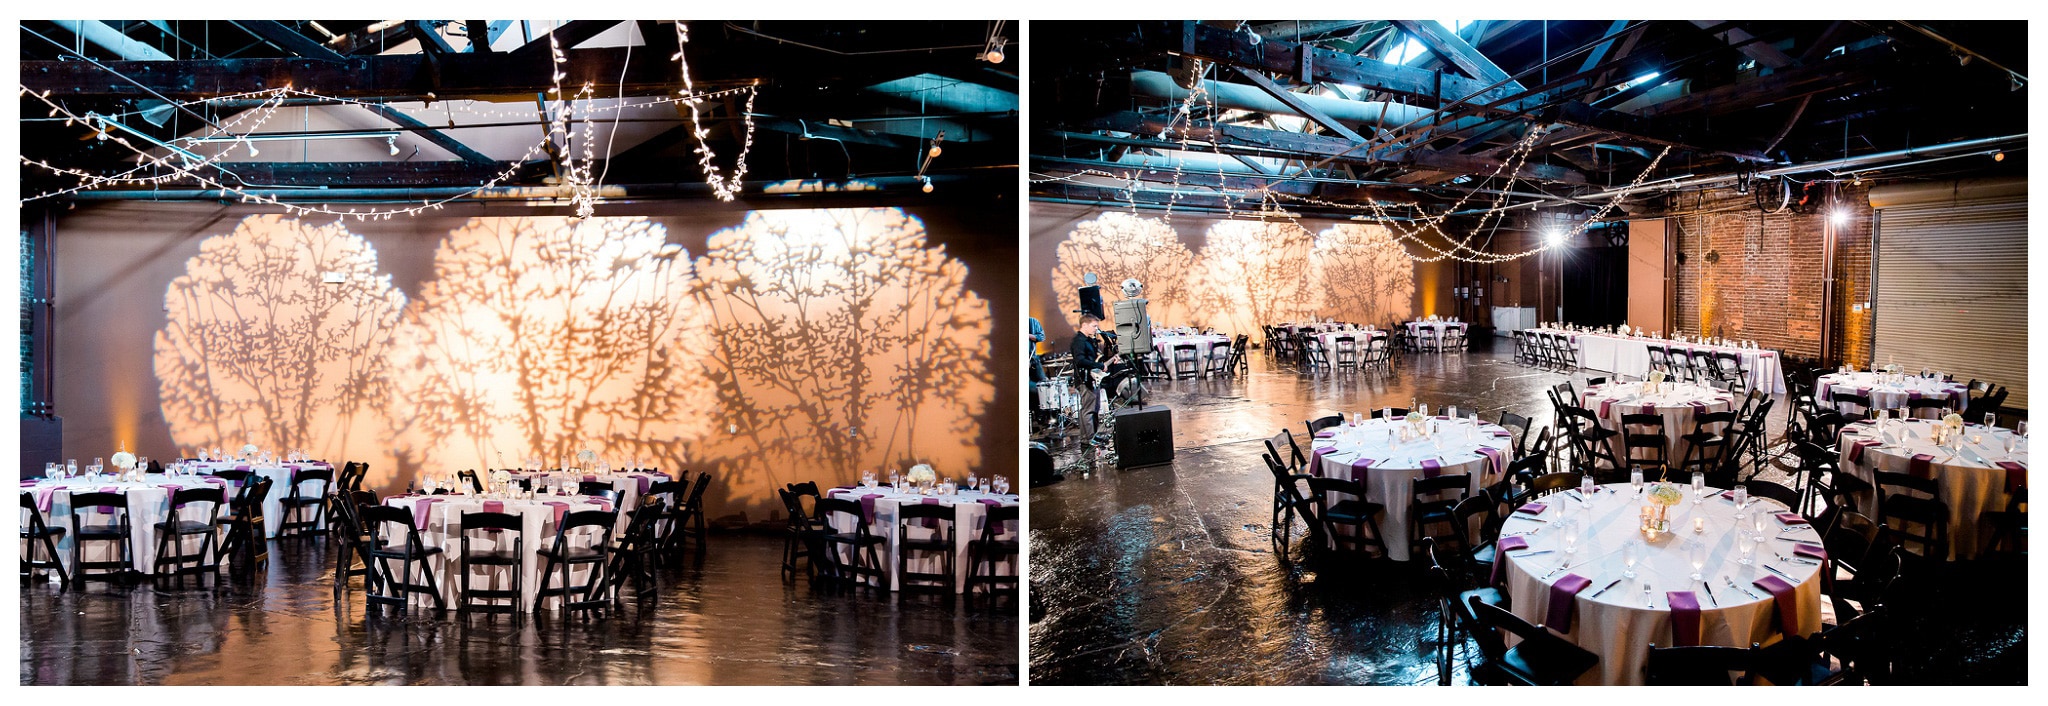 Wooden Rafters and Brick Walls the Reception room all done out, the shadow trees are an excellent touch - Venue and Catering – King plow Event Gallery and Bold American Events Decor and flowers – Stylish Stems Music and Band – Seven Sharp Nine Transportation – Georgia Trolley Photographer One Life Photography